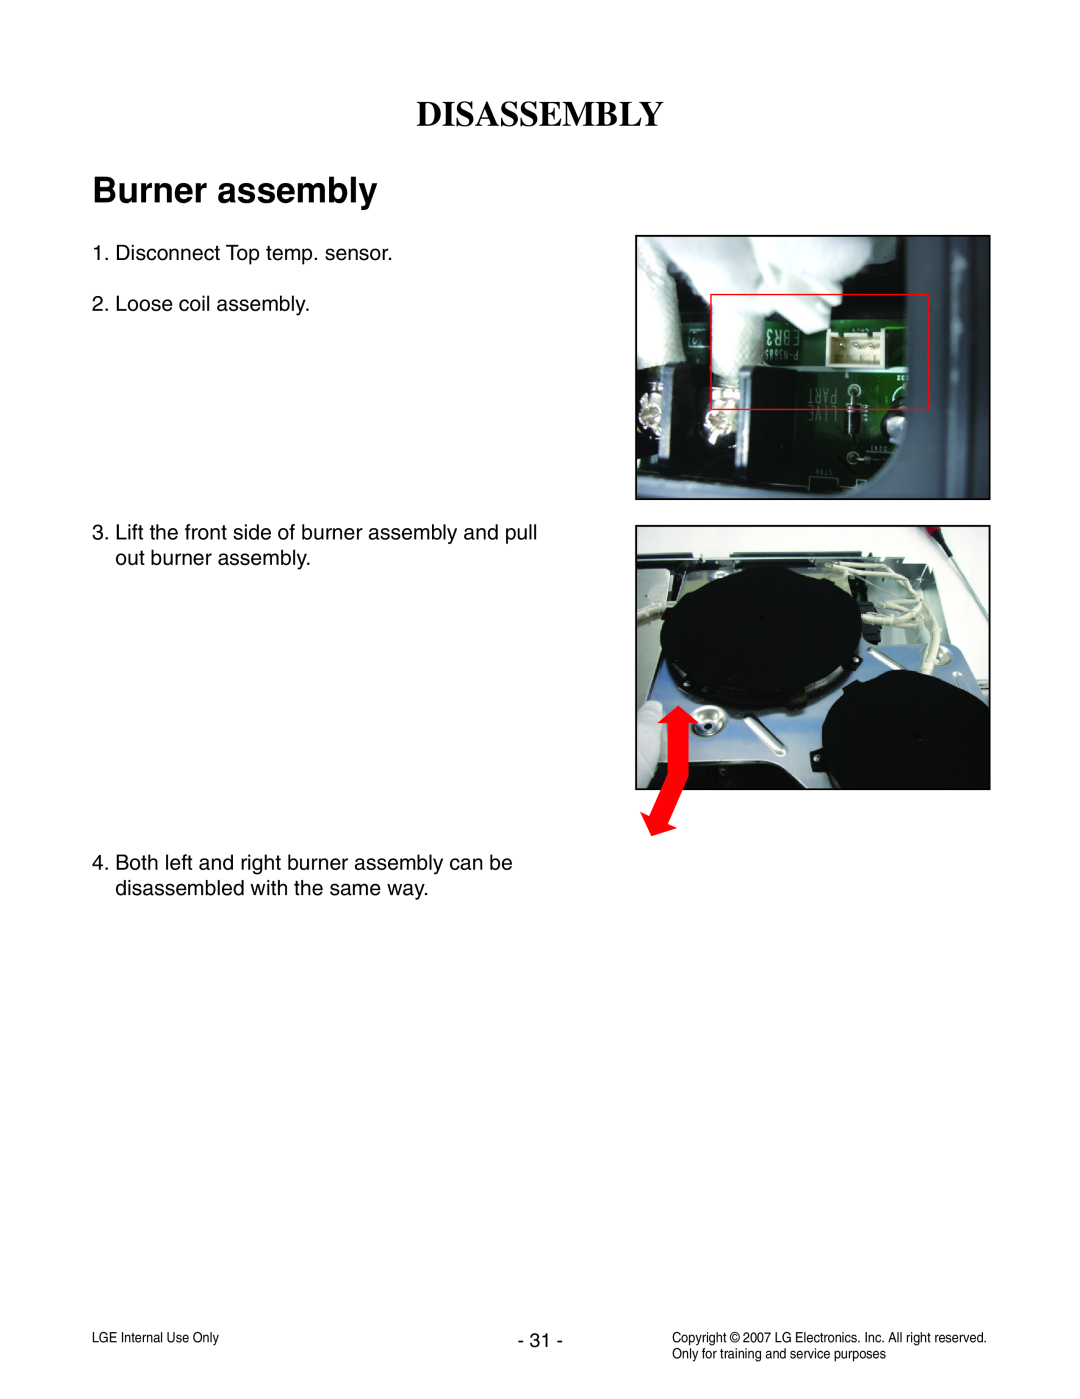 LG Electronics LCE30845 service manual Burner assembly, Disassembly, Disconnect Top temp. sensor 2. Loose coil assembly 